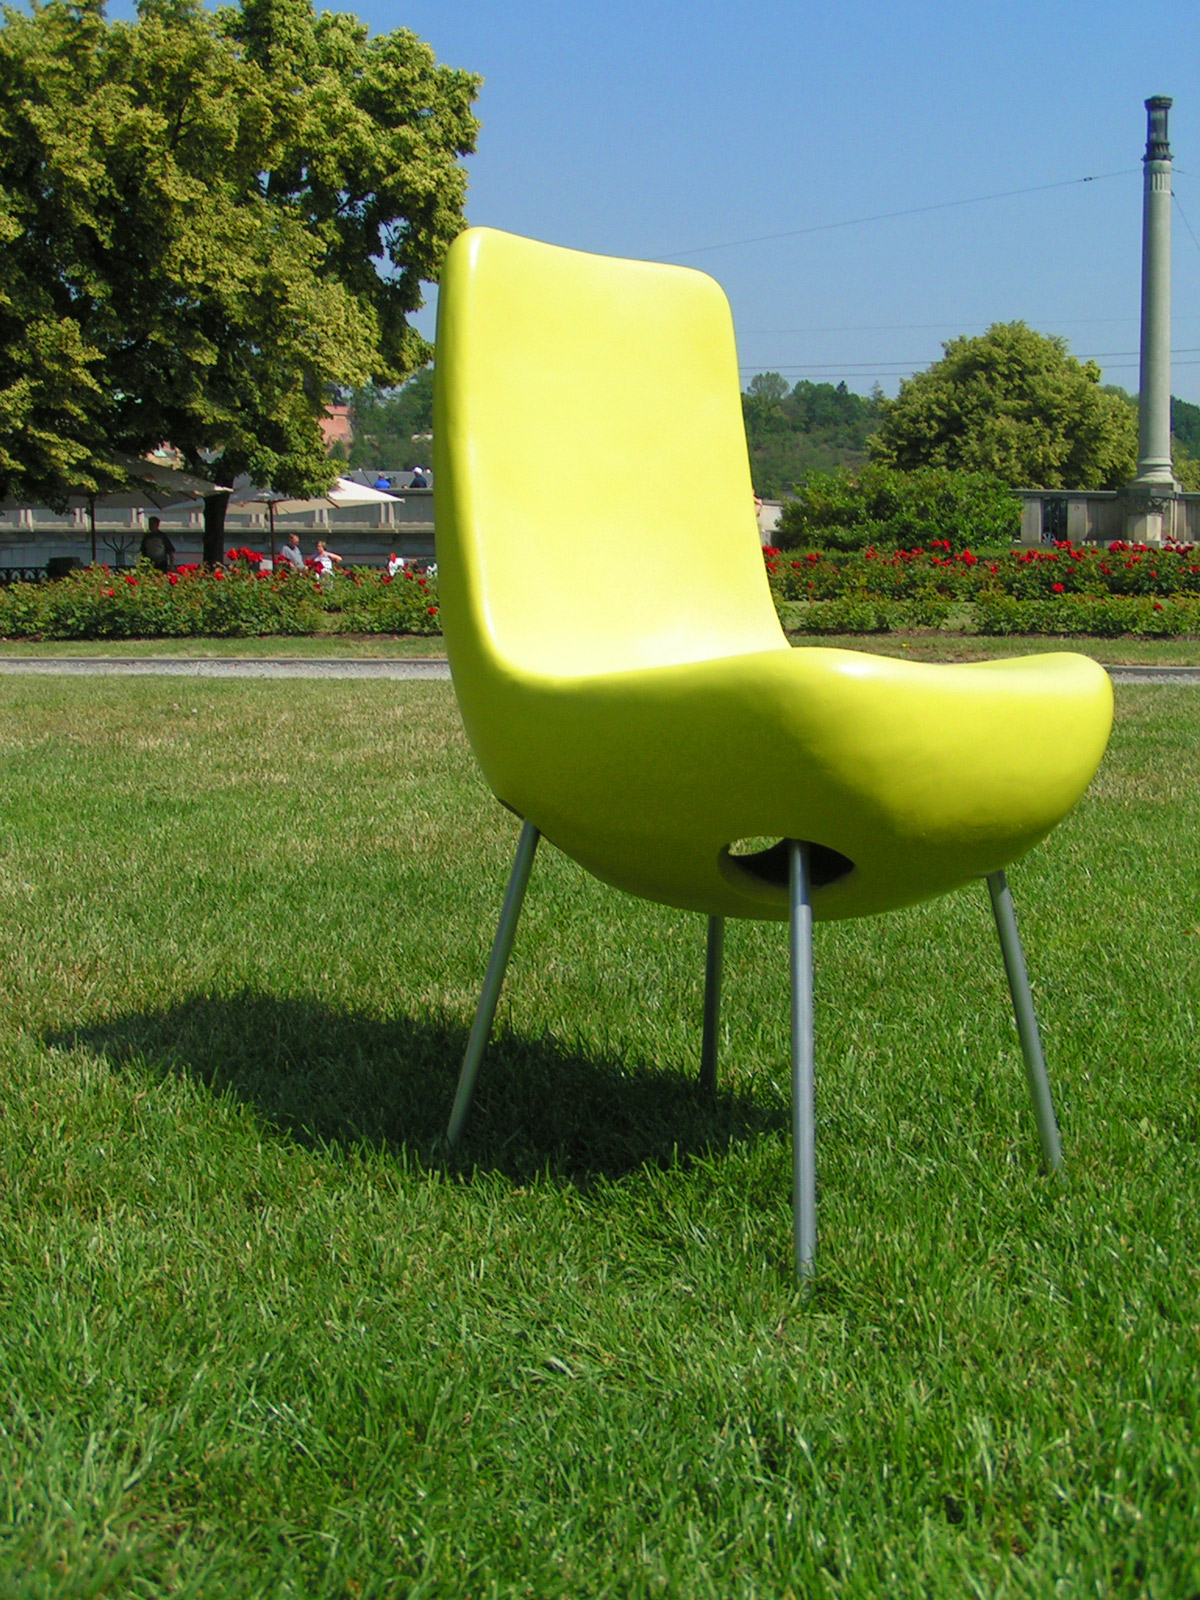 the chair is inspired with the new architectural design of National library in Prague